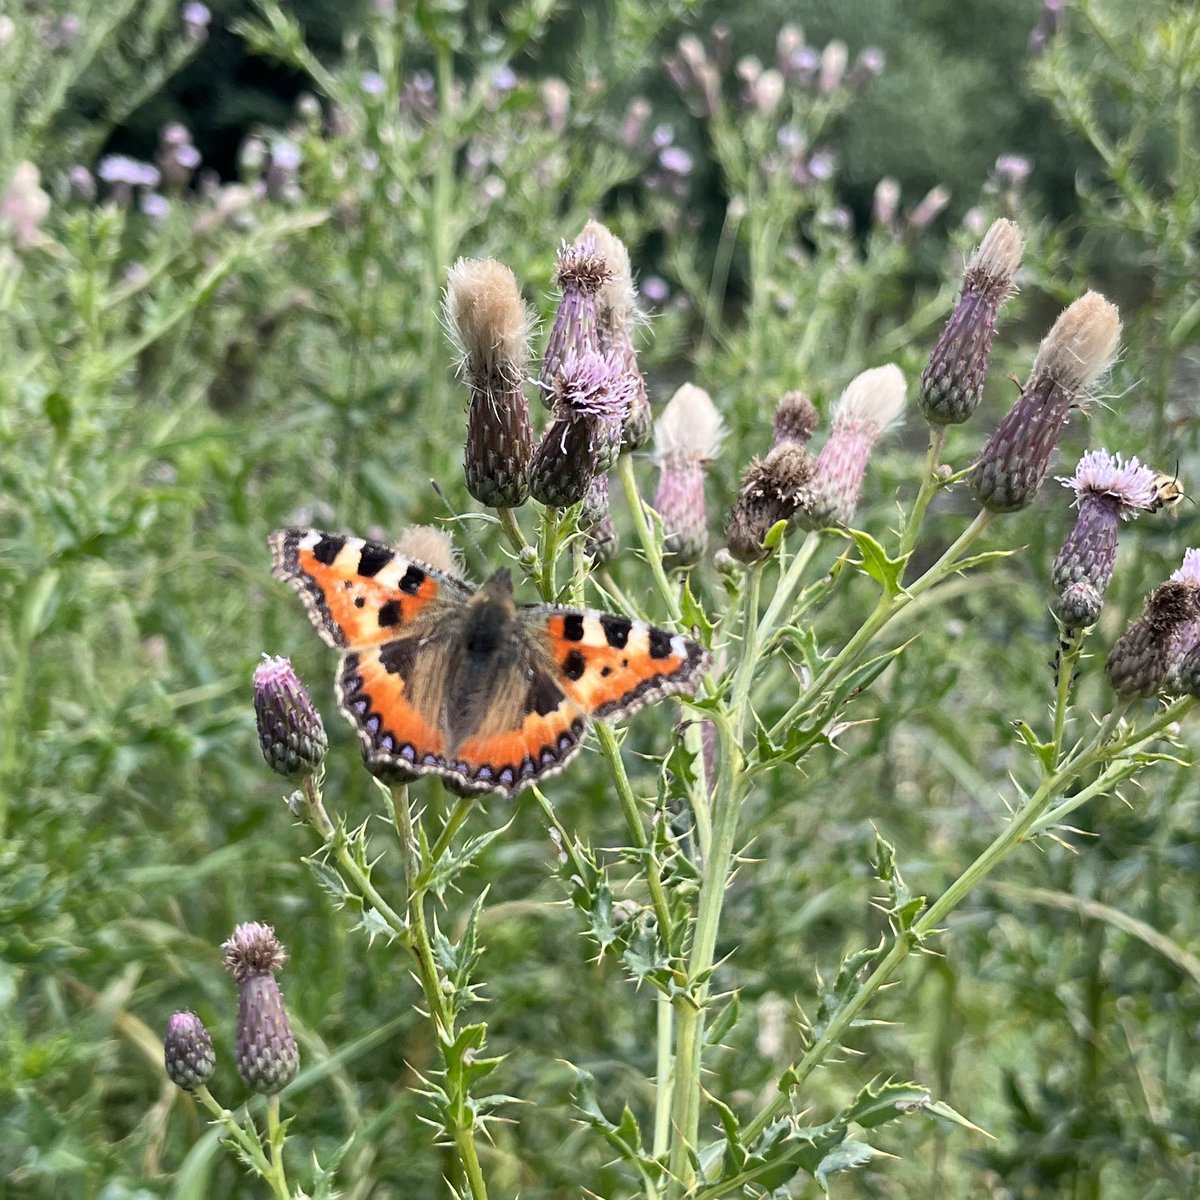 Counting Butterflies By the Wye in a thistle patch to do my #BigButterflyCount. Excited to see 3 commas for the first time! Also large white, small white, small tortoiseshell, red admiral, ringlet & gatekeeper. A fluttery filled 15 mins to help #nature & @savebutterflies 🦋